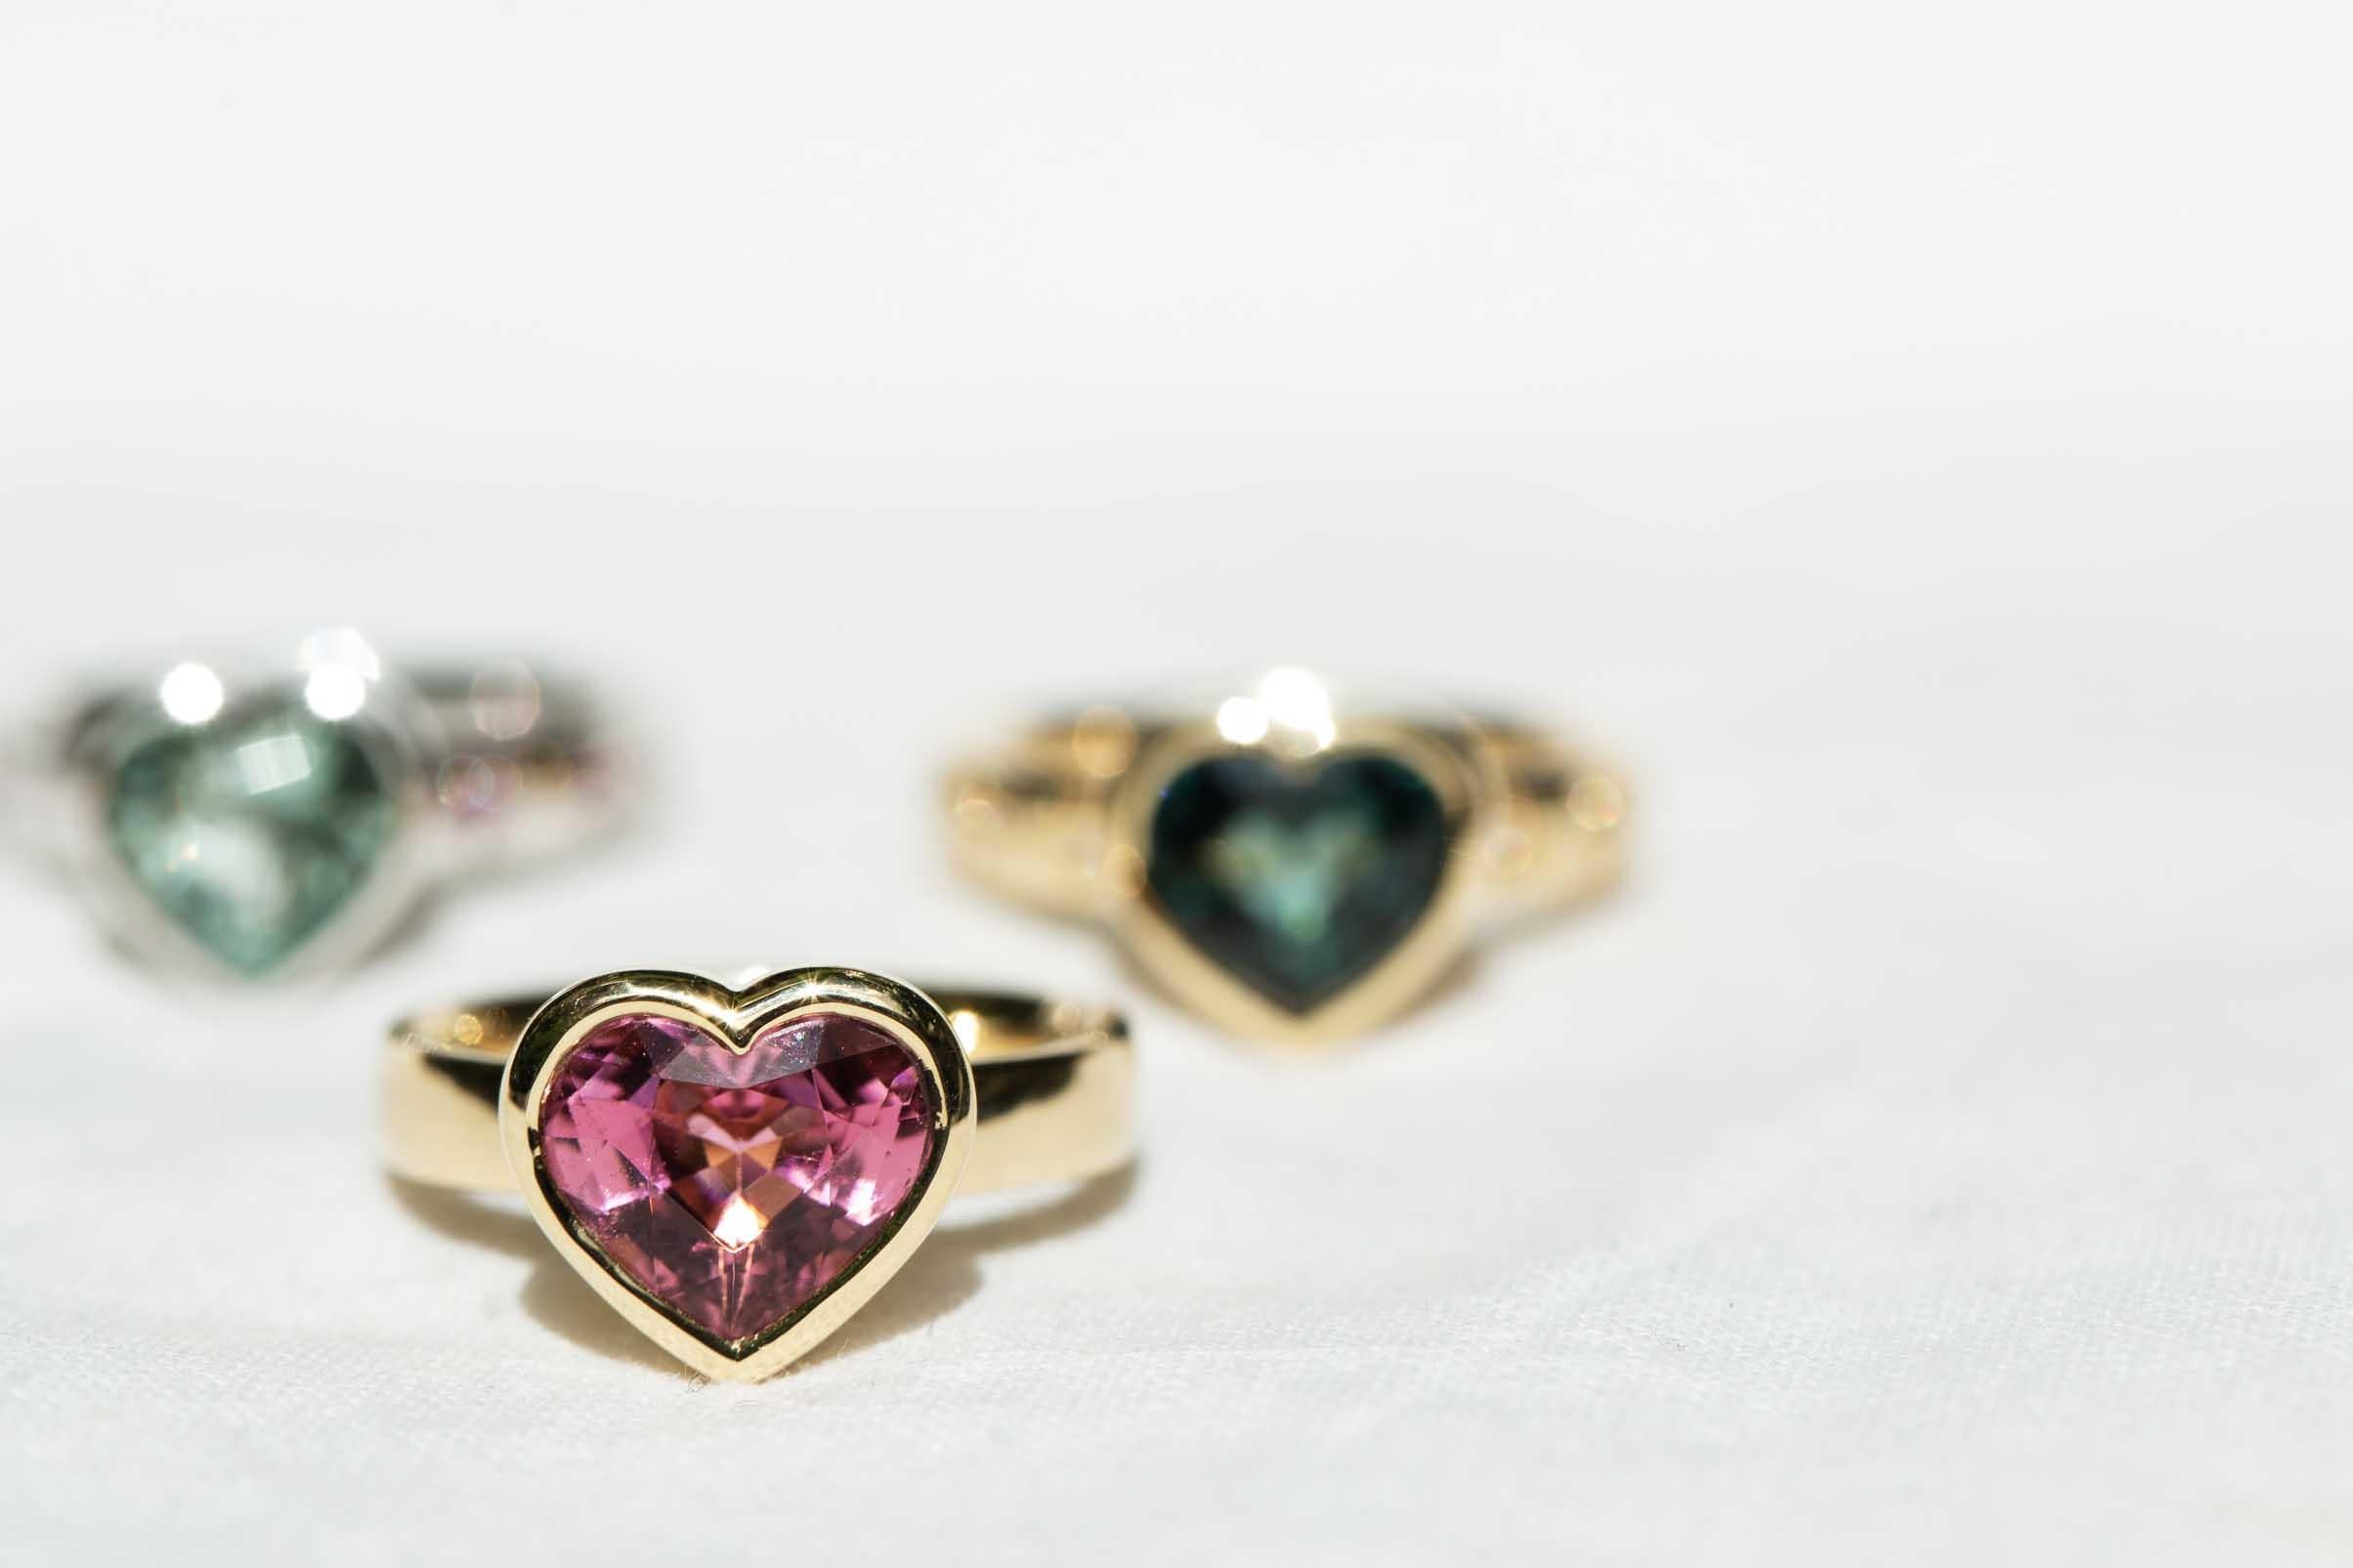 Women's Contemporary Cerys 2.97 Carat Pink Tourmaline Heart Ring 18 Carat Gold For Sale